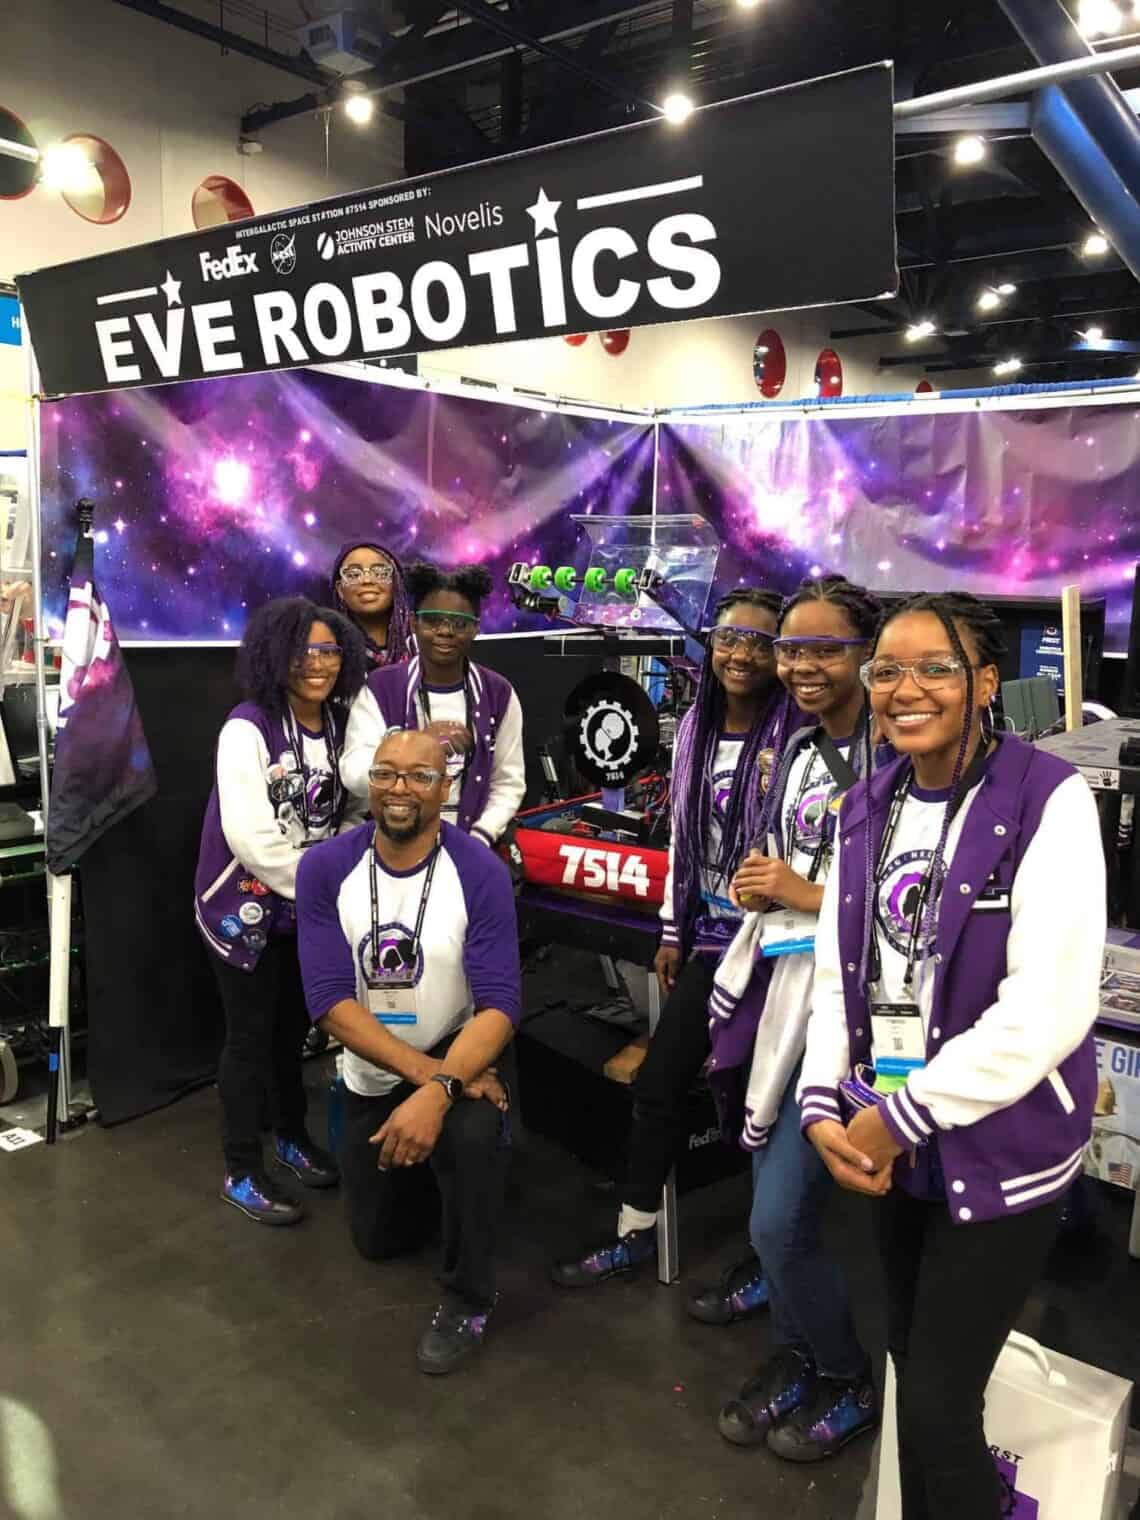 Recap of 2019 FIRST Robotics Championship in Houston, Texas All Together